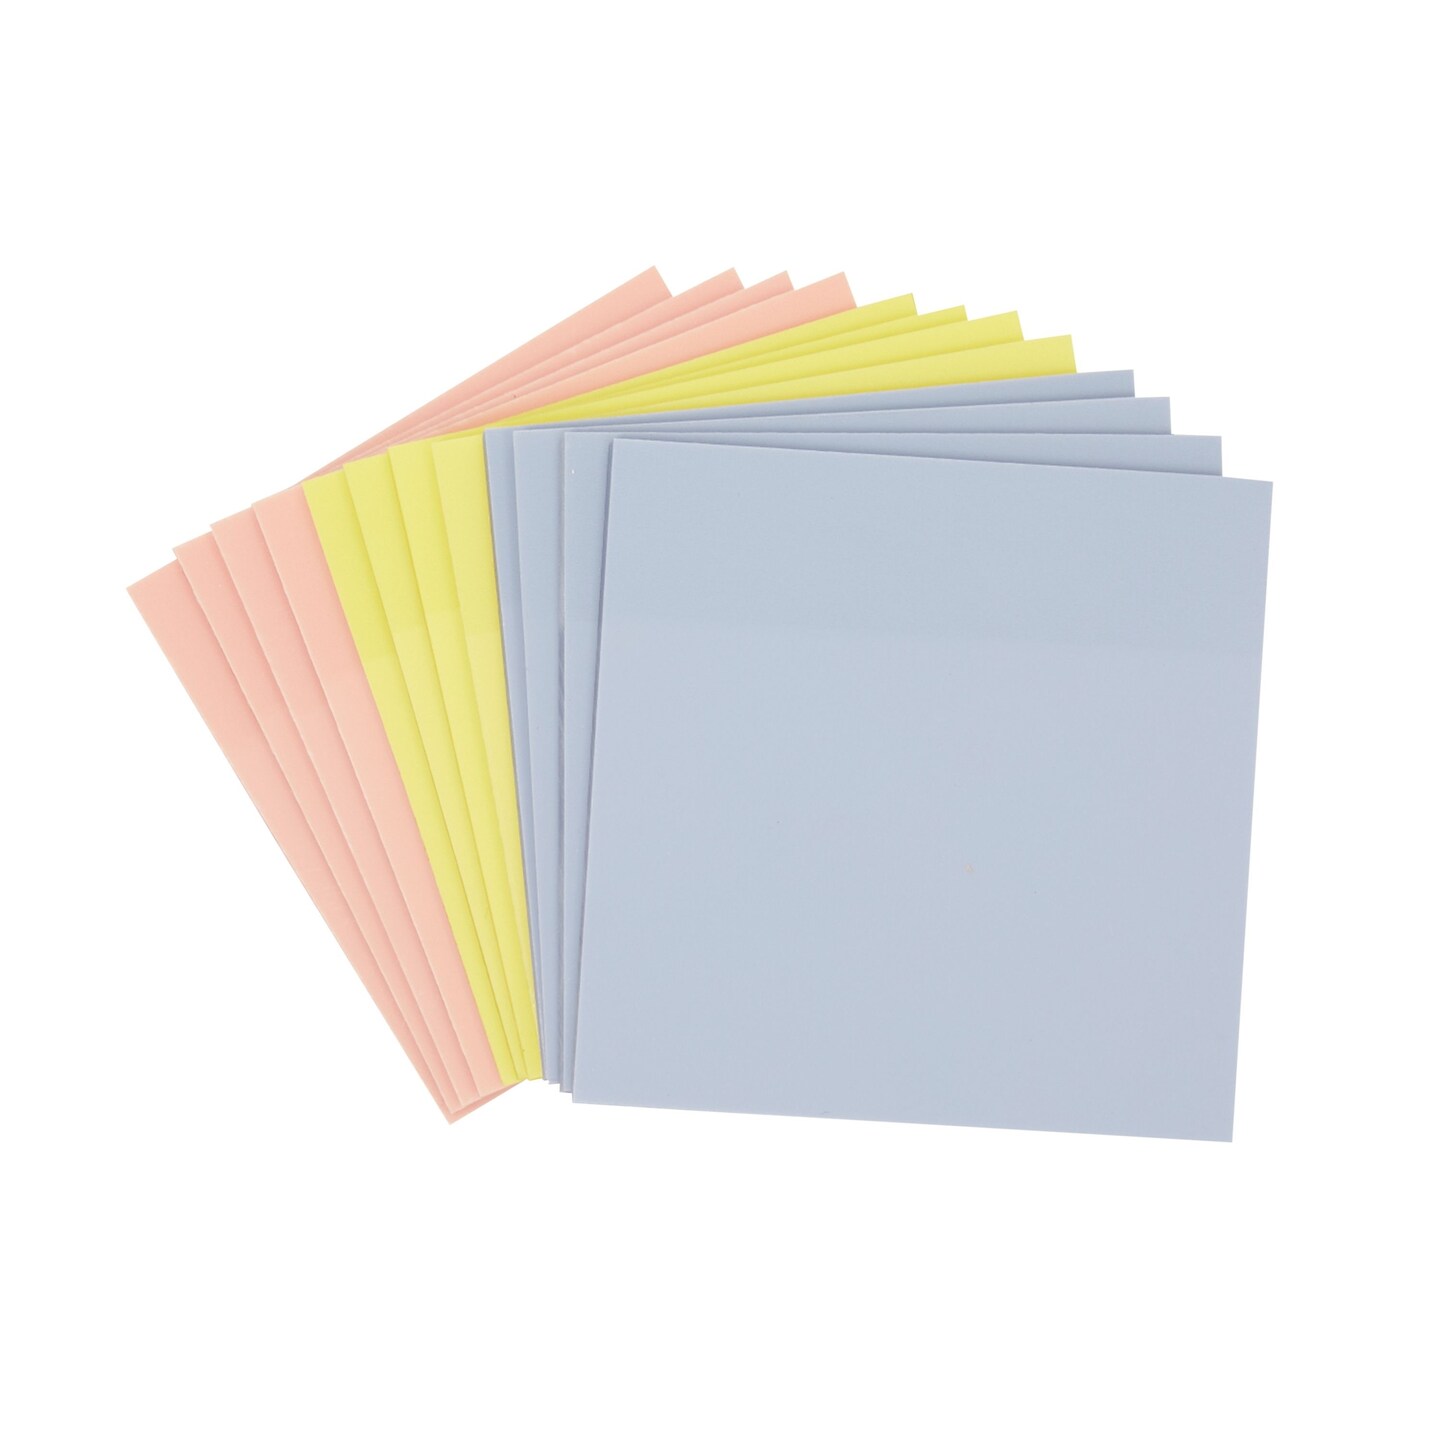 3x3 Transparent Sticky Notes, Self-Stick Pads in 3 Colors, 600